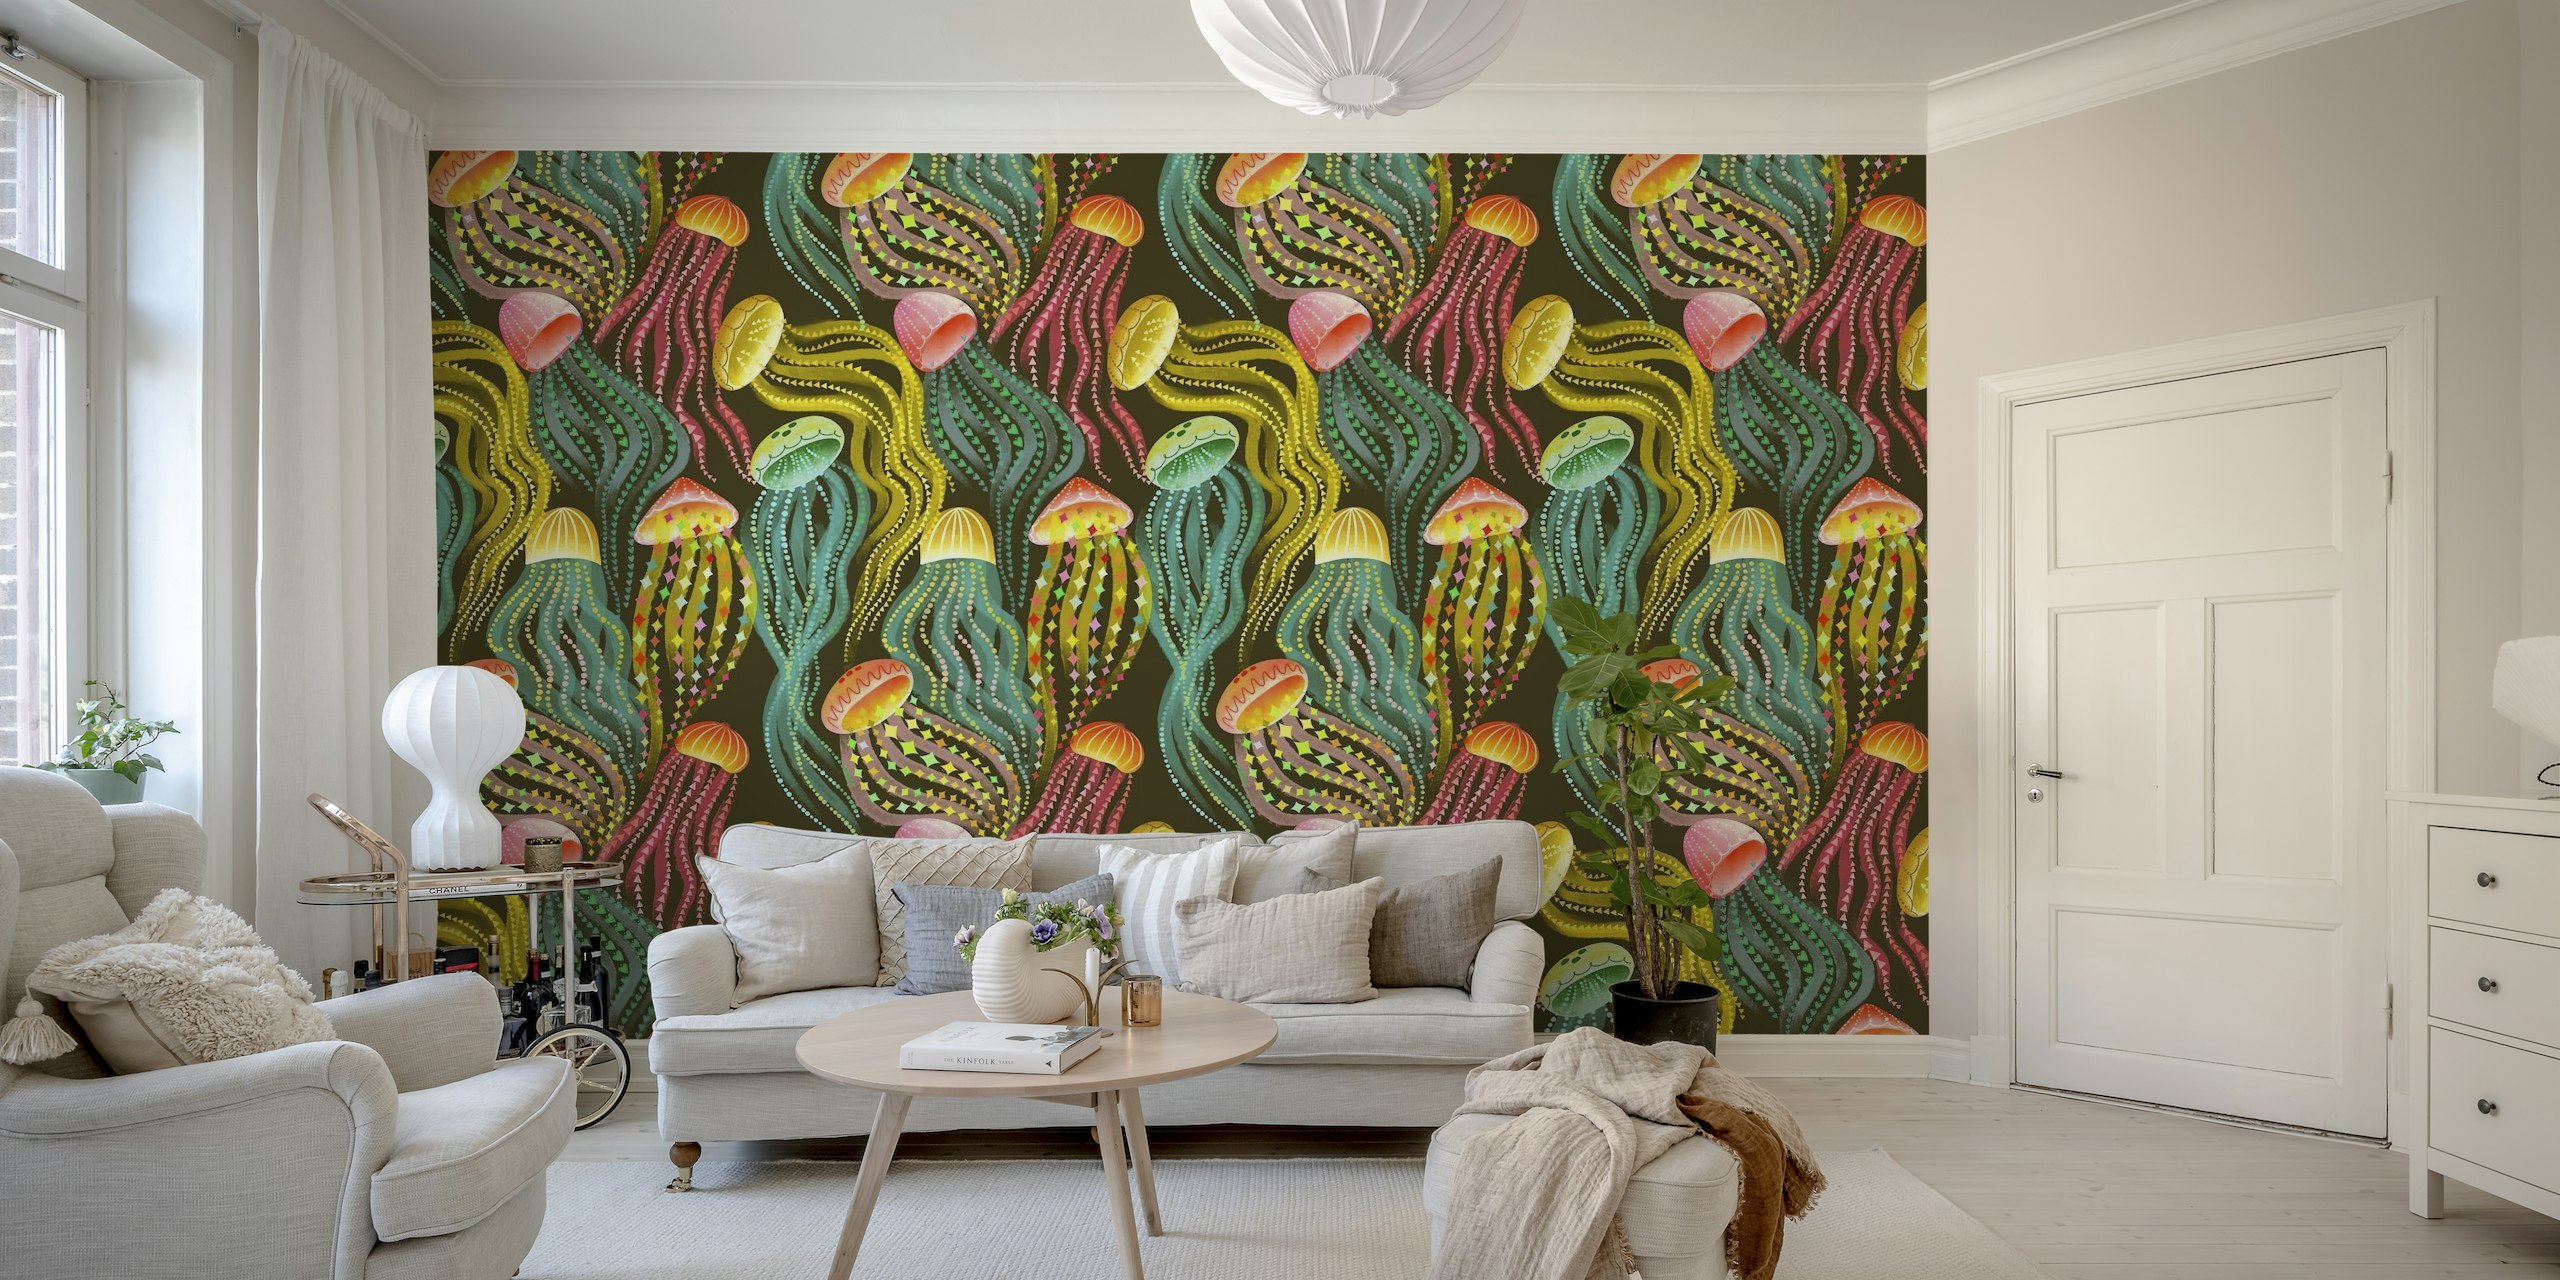 Colorful jellyfish mural with dynamic patterns on a dark background